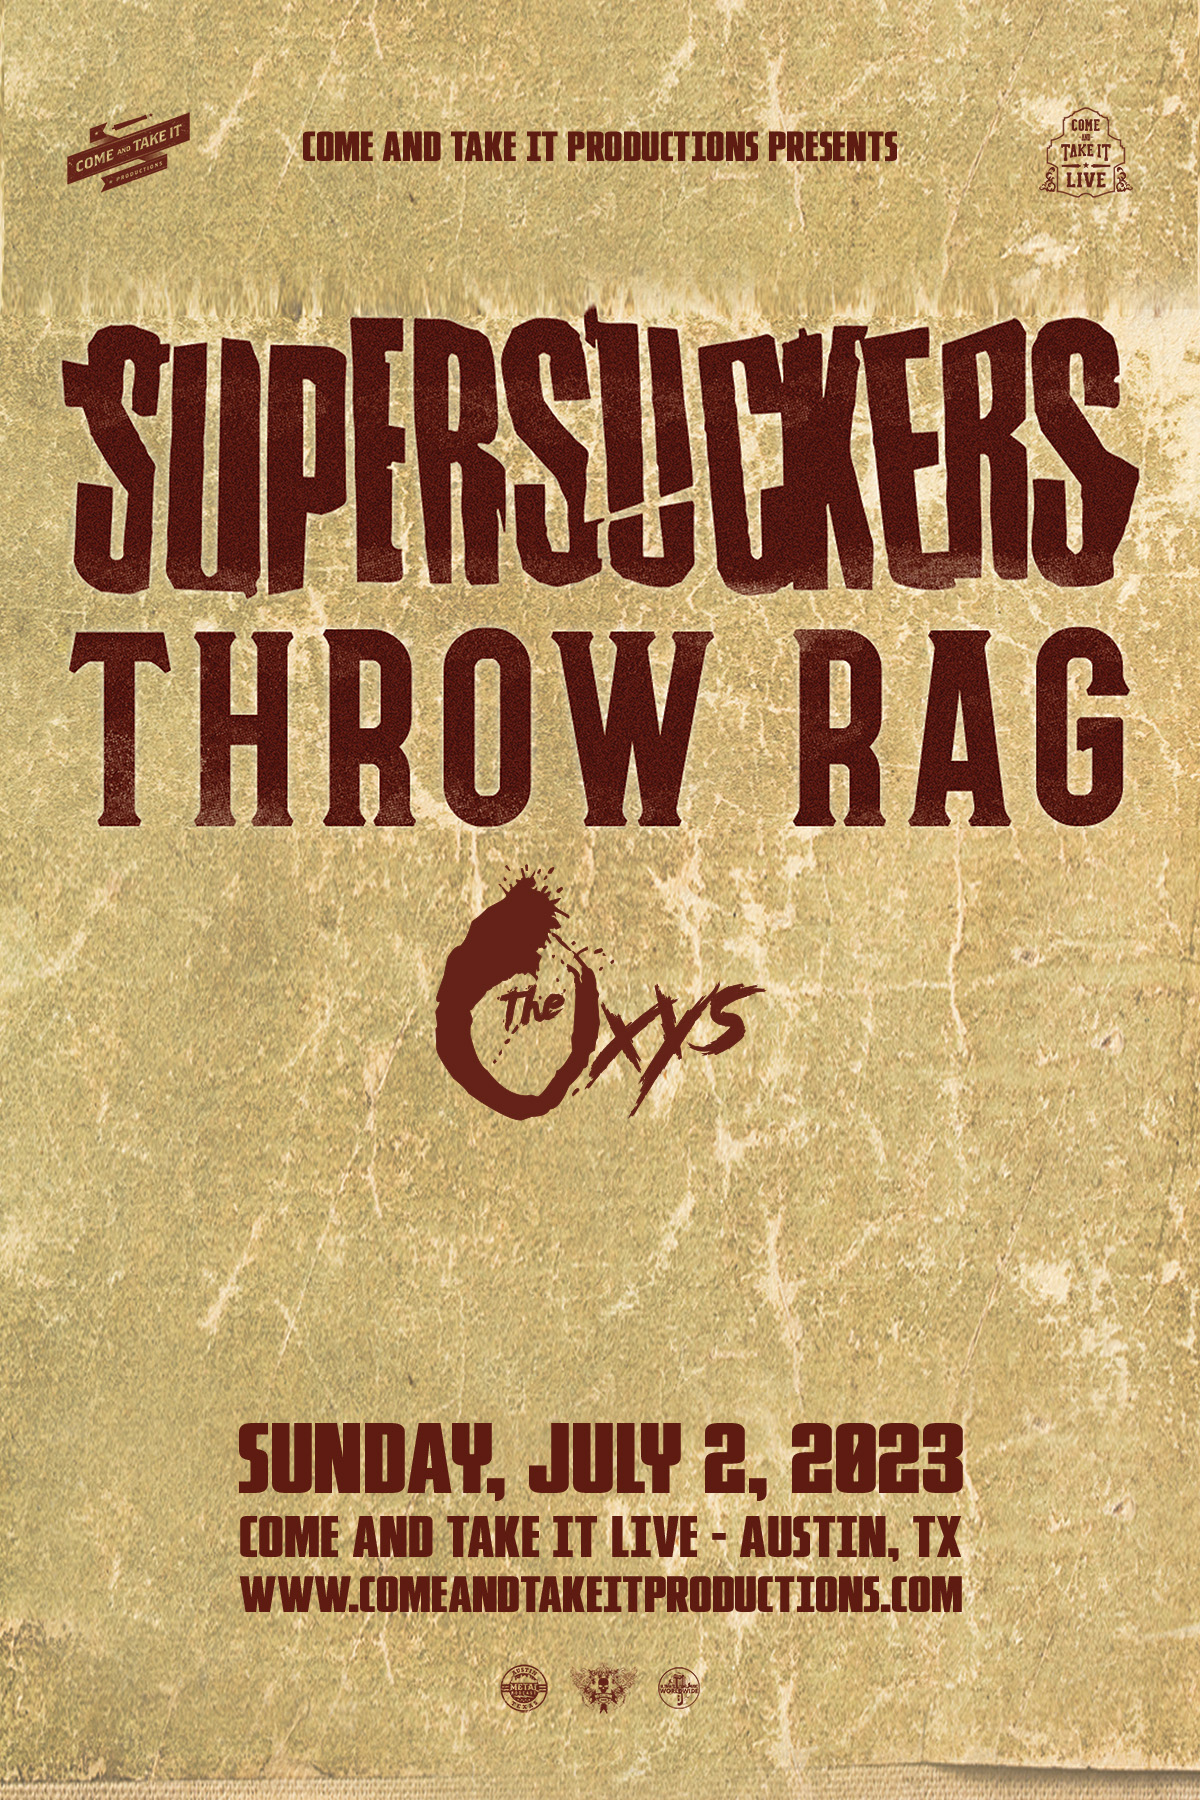 Supersuckers, Throw Rag and The Oxys